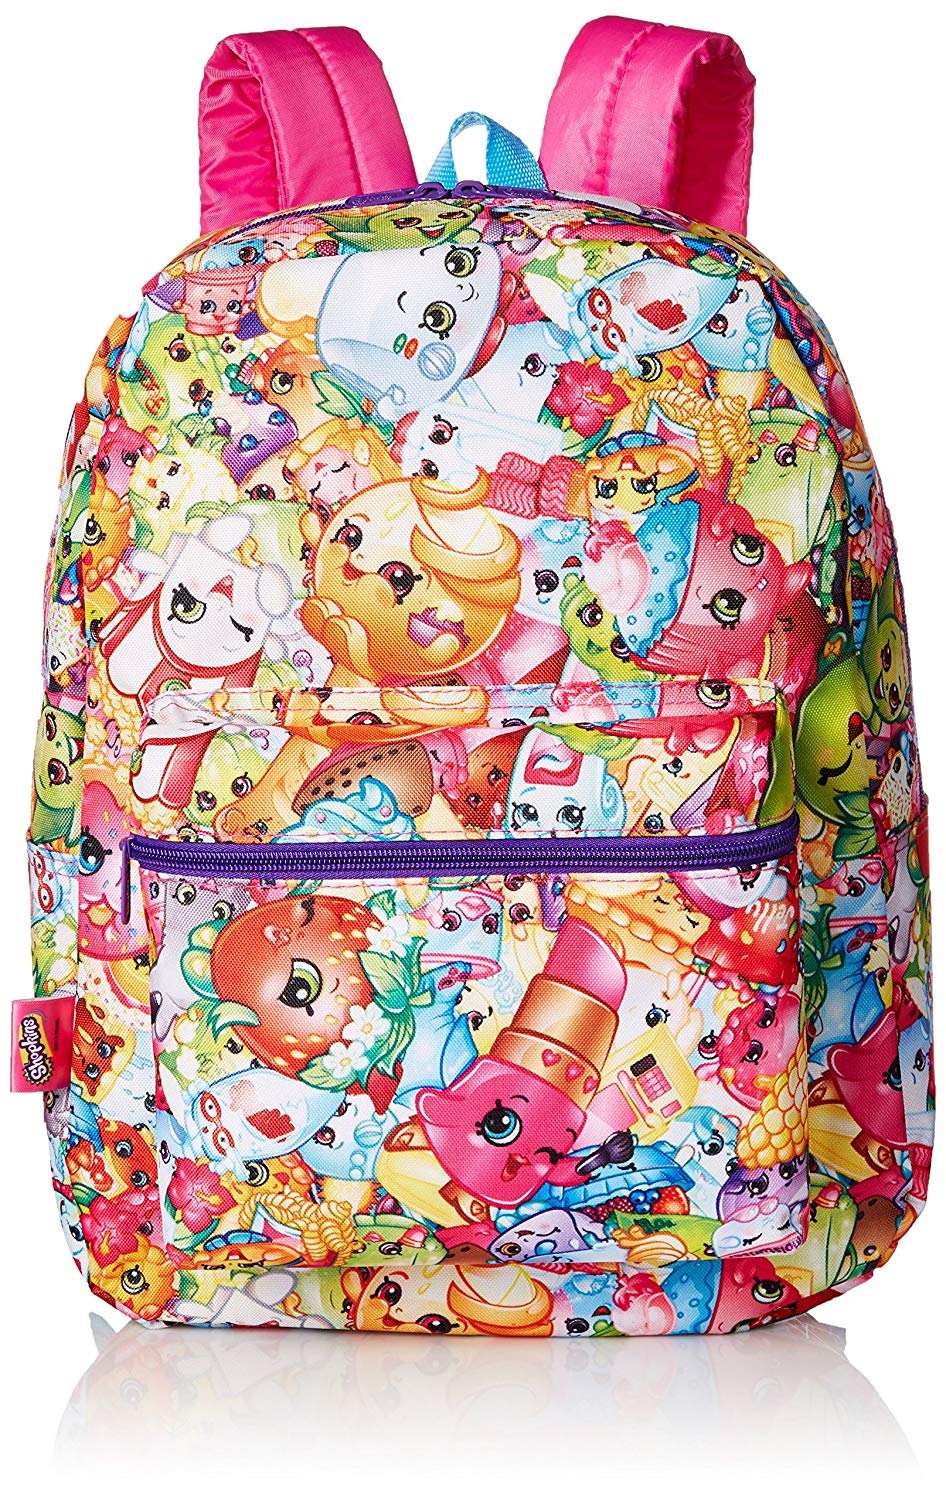 Shopkins Little Girls Print Backpack, Multi, One Size SY30713 - image 1 of 3